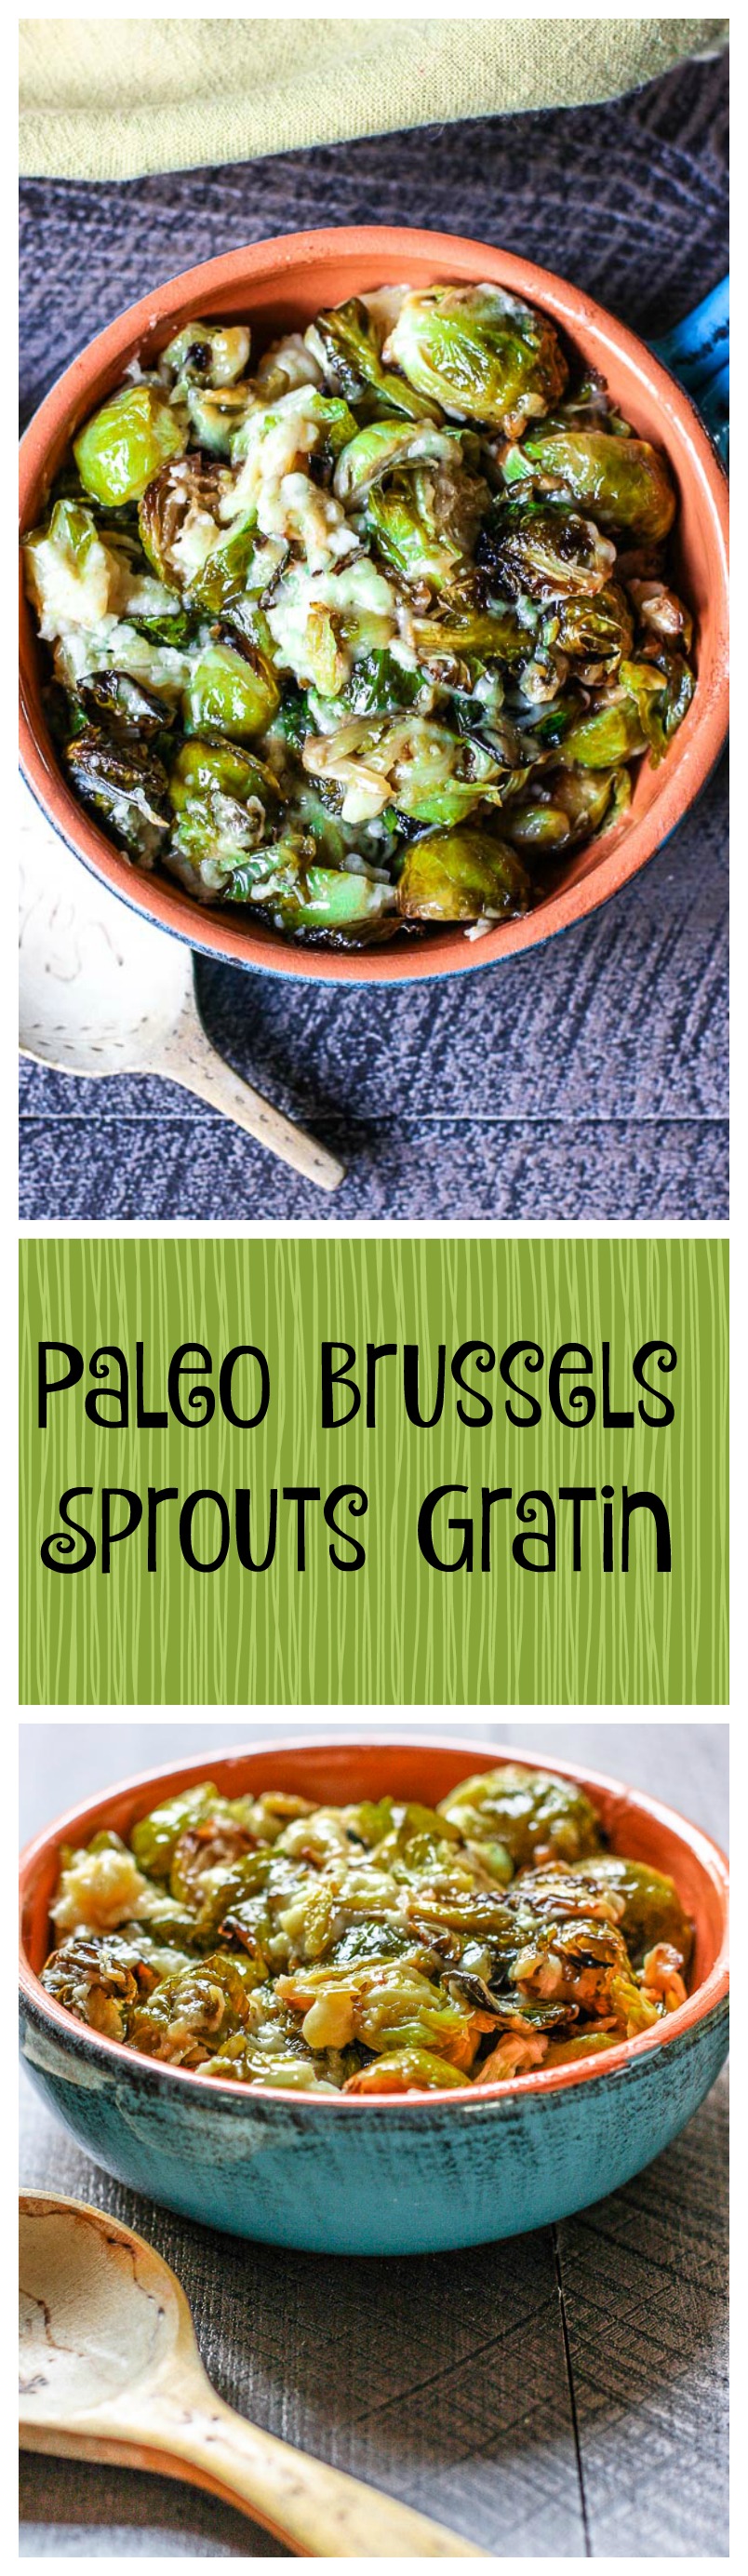 paleo brussels sprouts gratin